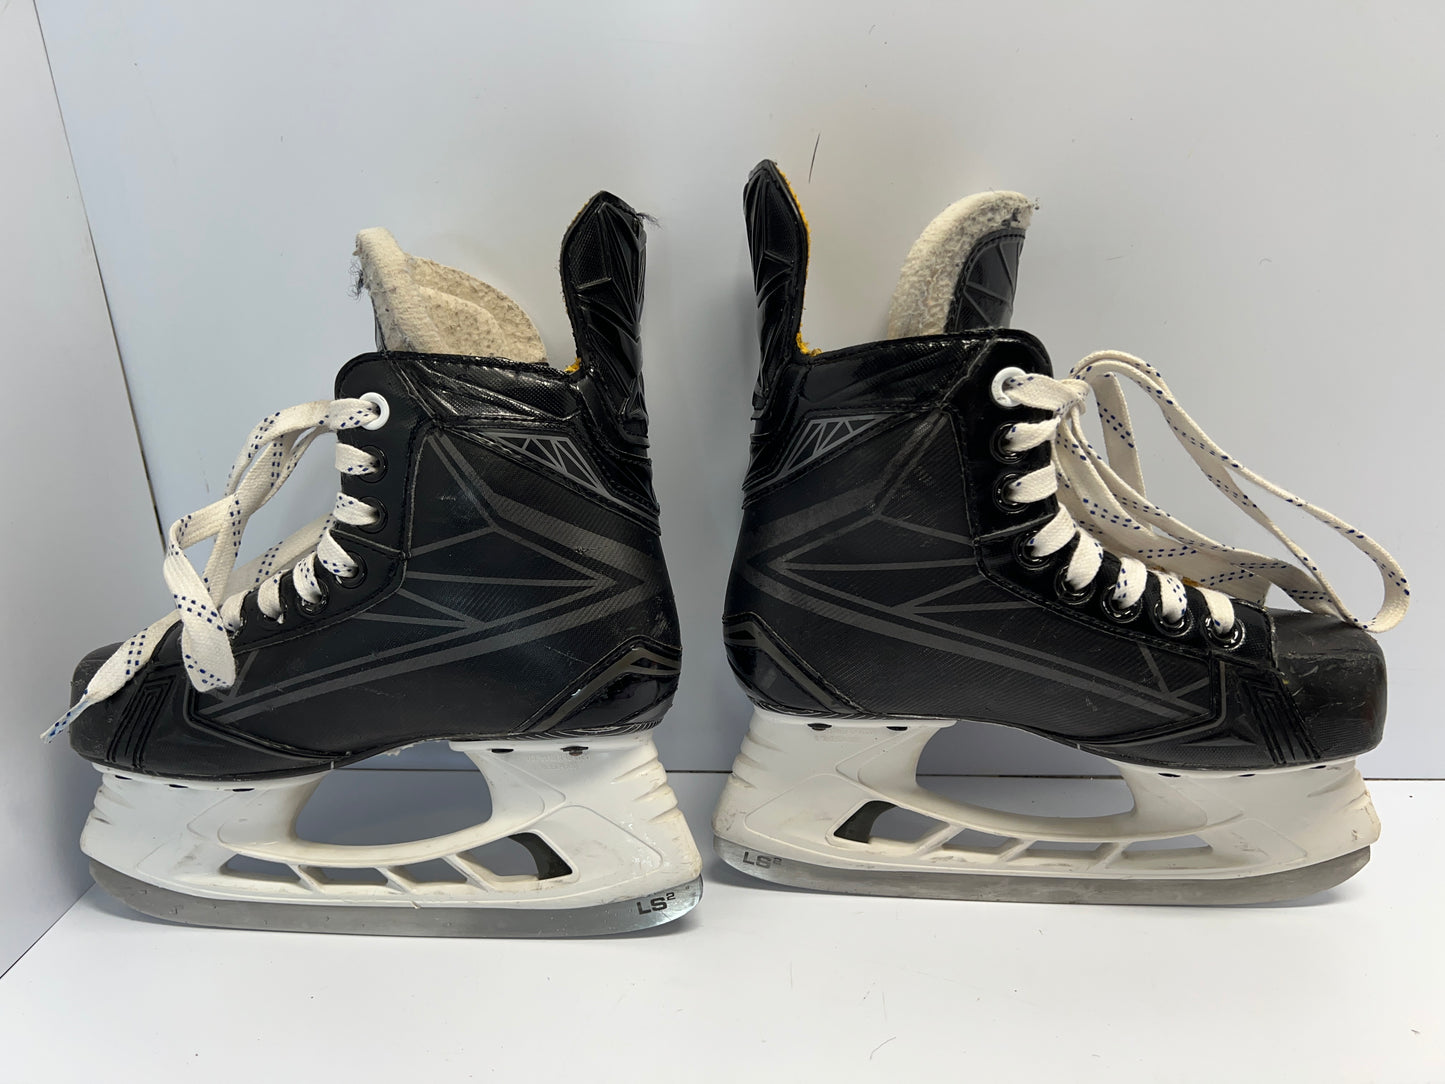 Hockey Skates Child Size 2 Shoe Size 1 Skate Bauer Comp With LS 2 Special Blades